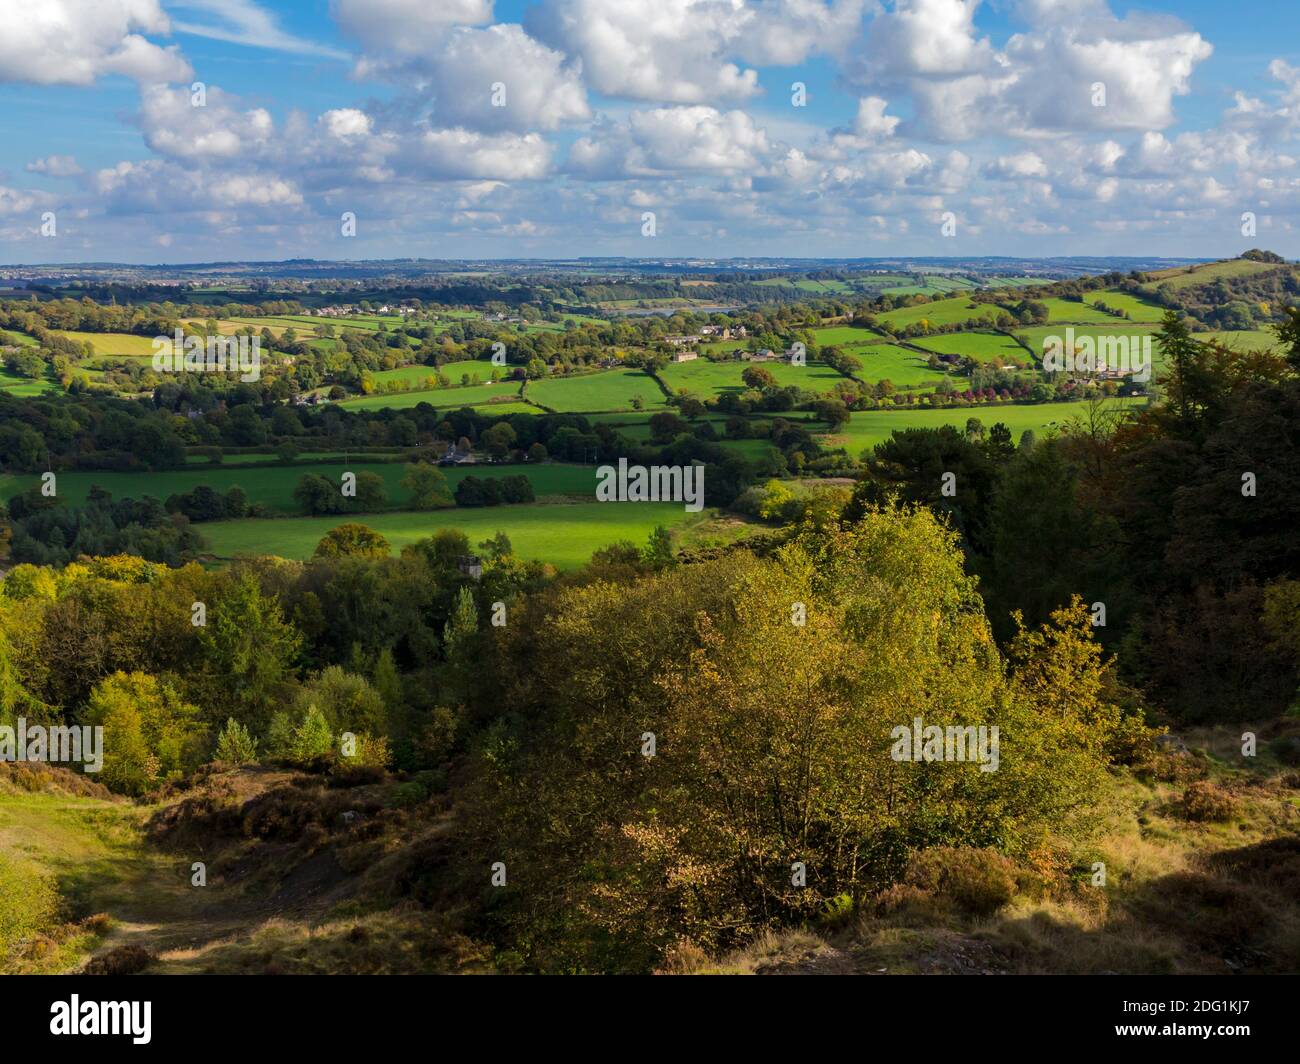 View looking across the countryside near Ashover in North East Derbyshire England UK close to the Peak District National Park. Stock Photo